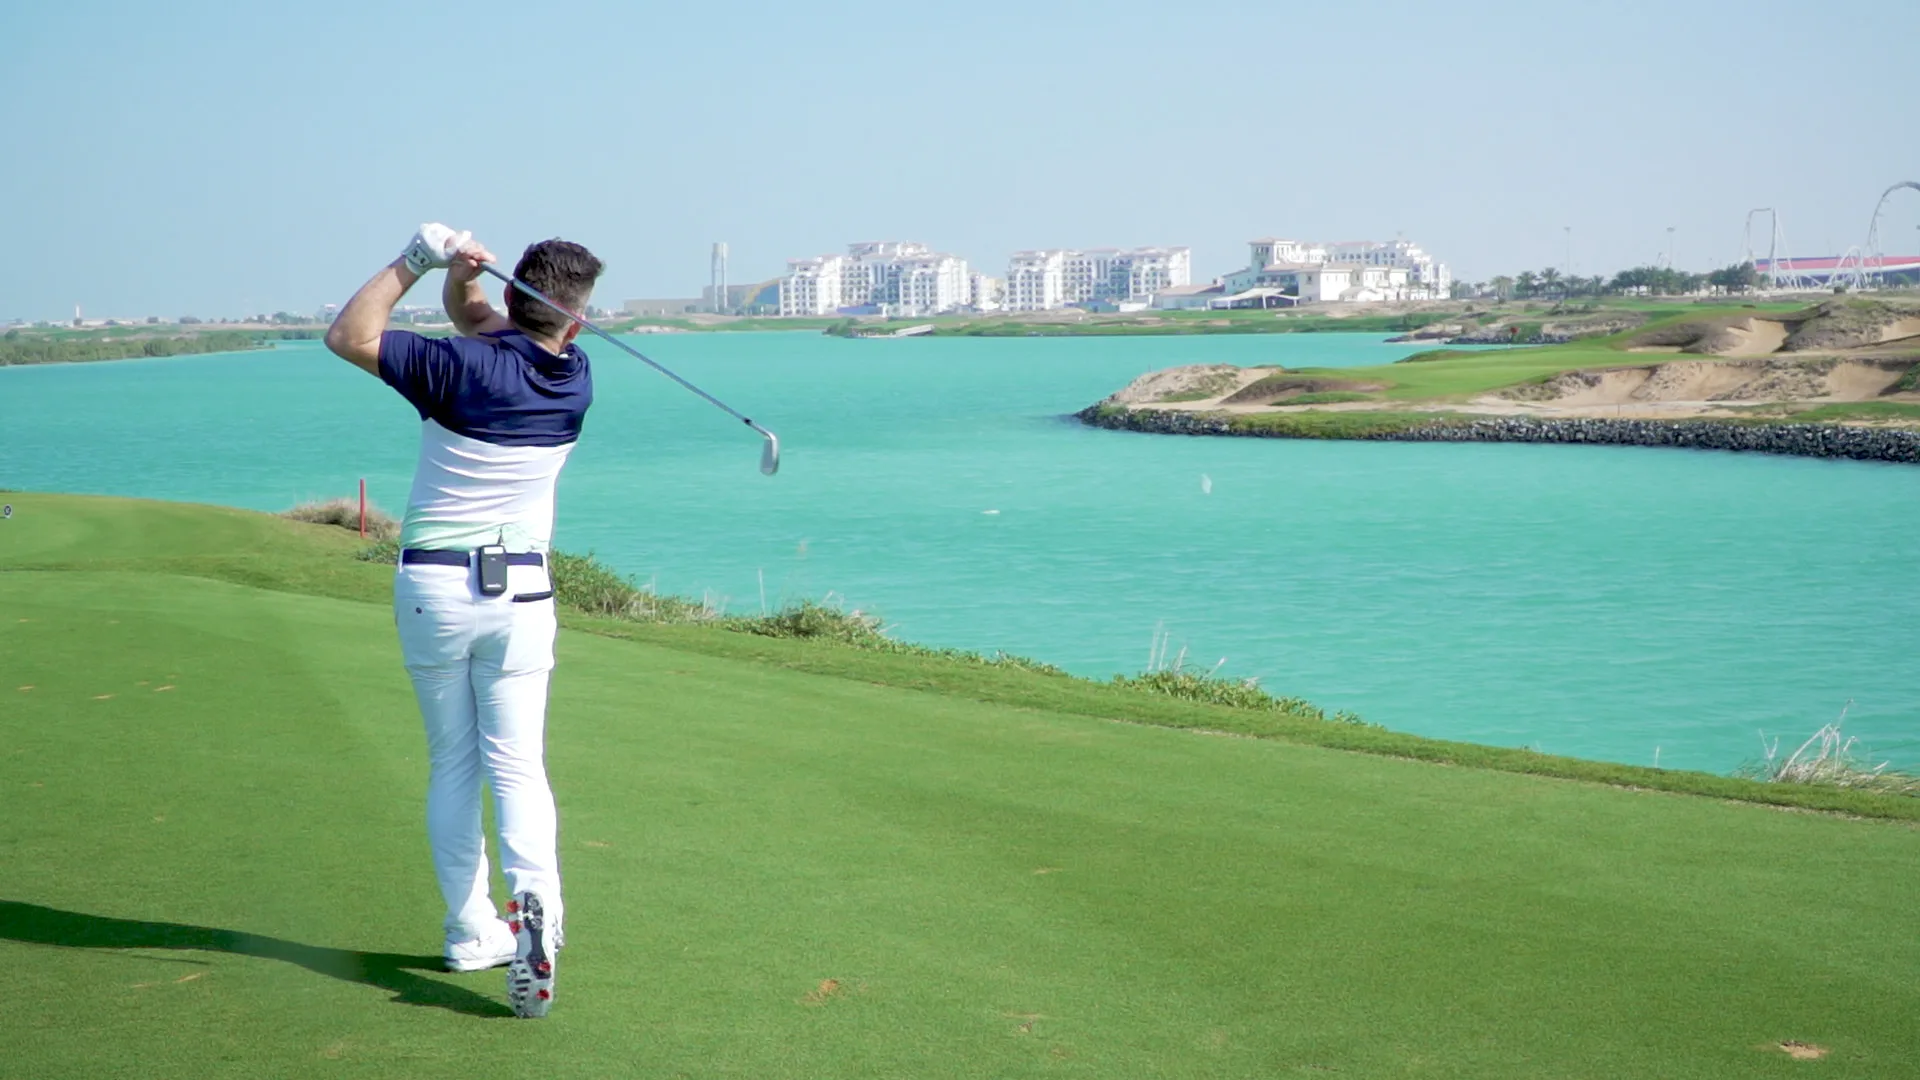 Dan Whittaker on how to play a par-3 over water